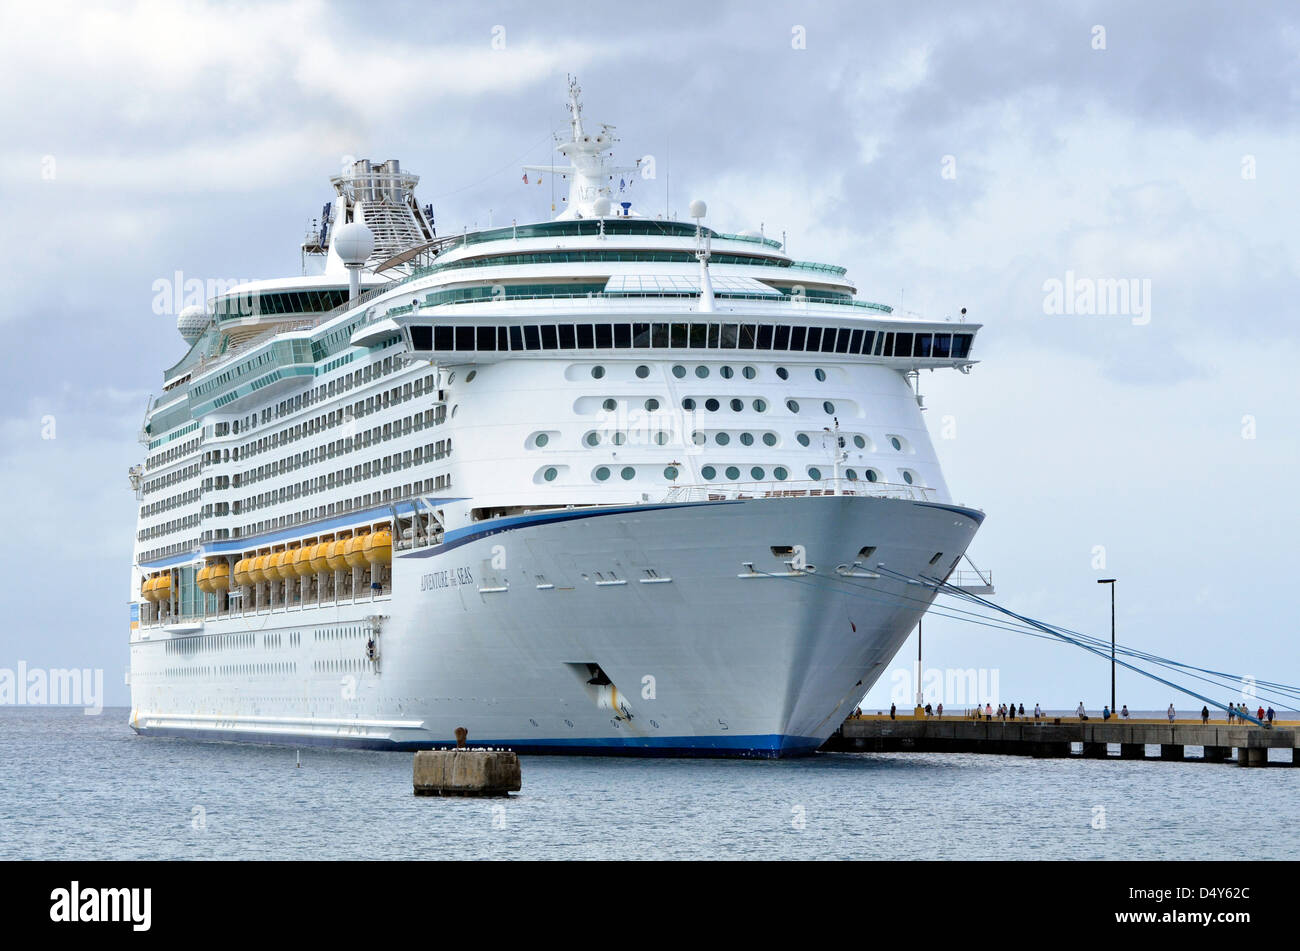 Cruise ship docked at Frederiksted, St. Croix, U.S. Virgin Islands. Stock Photo